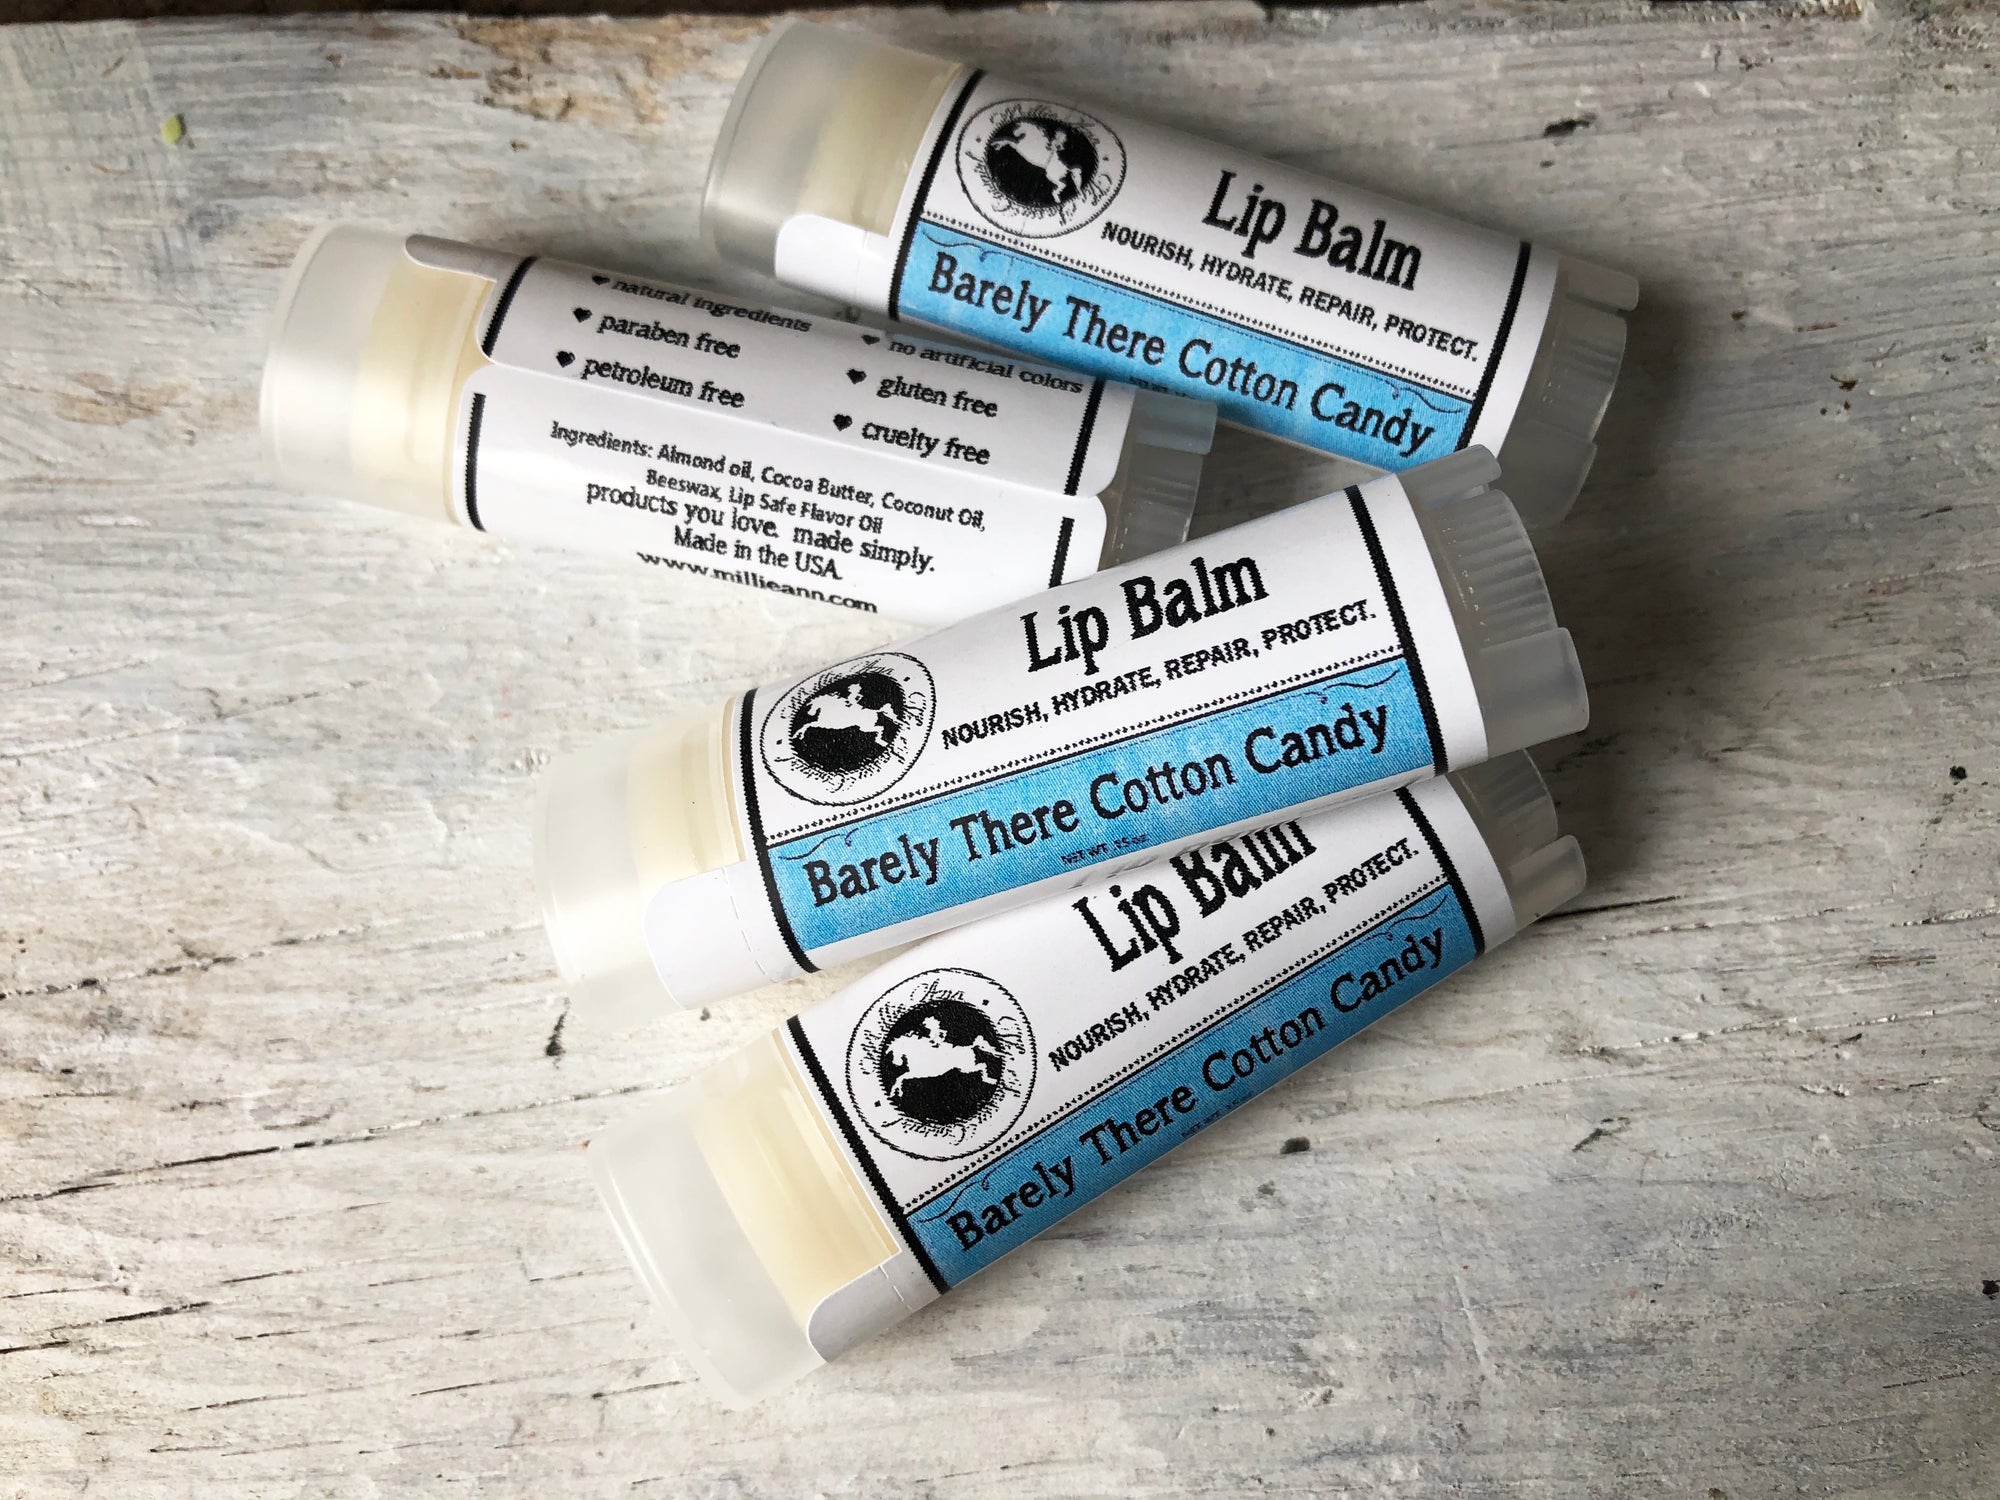 Lip Balm - Barely There Cotton Candy